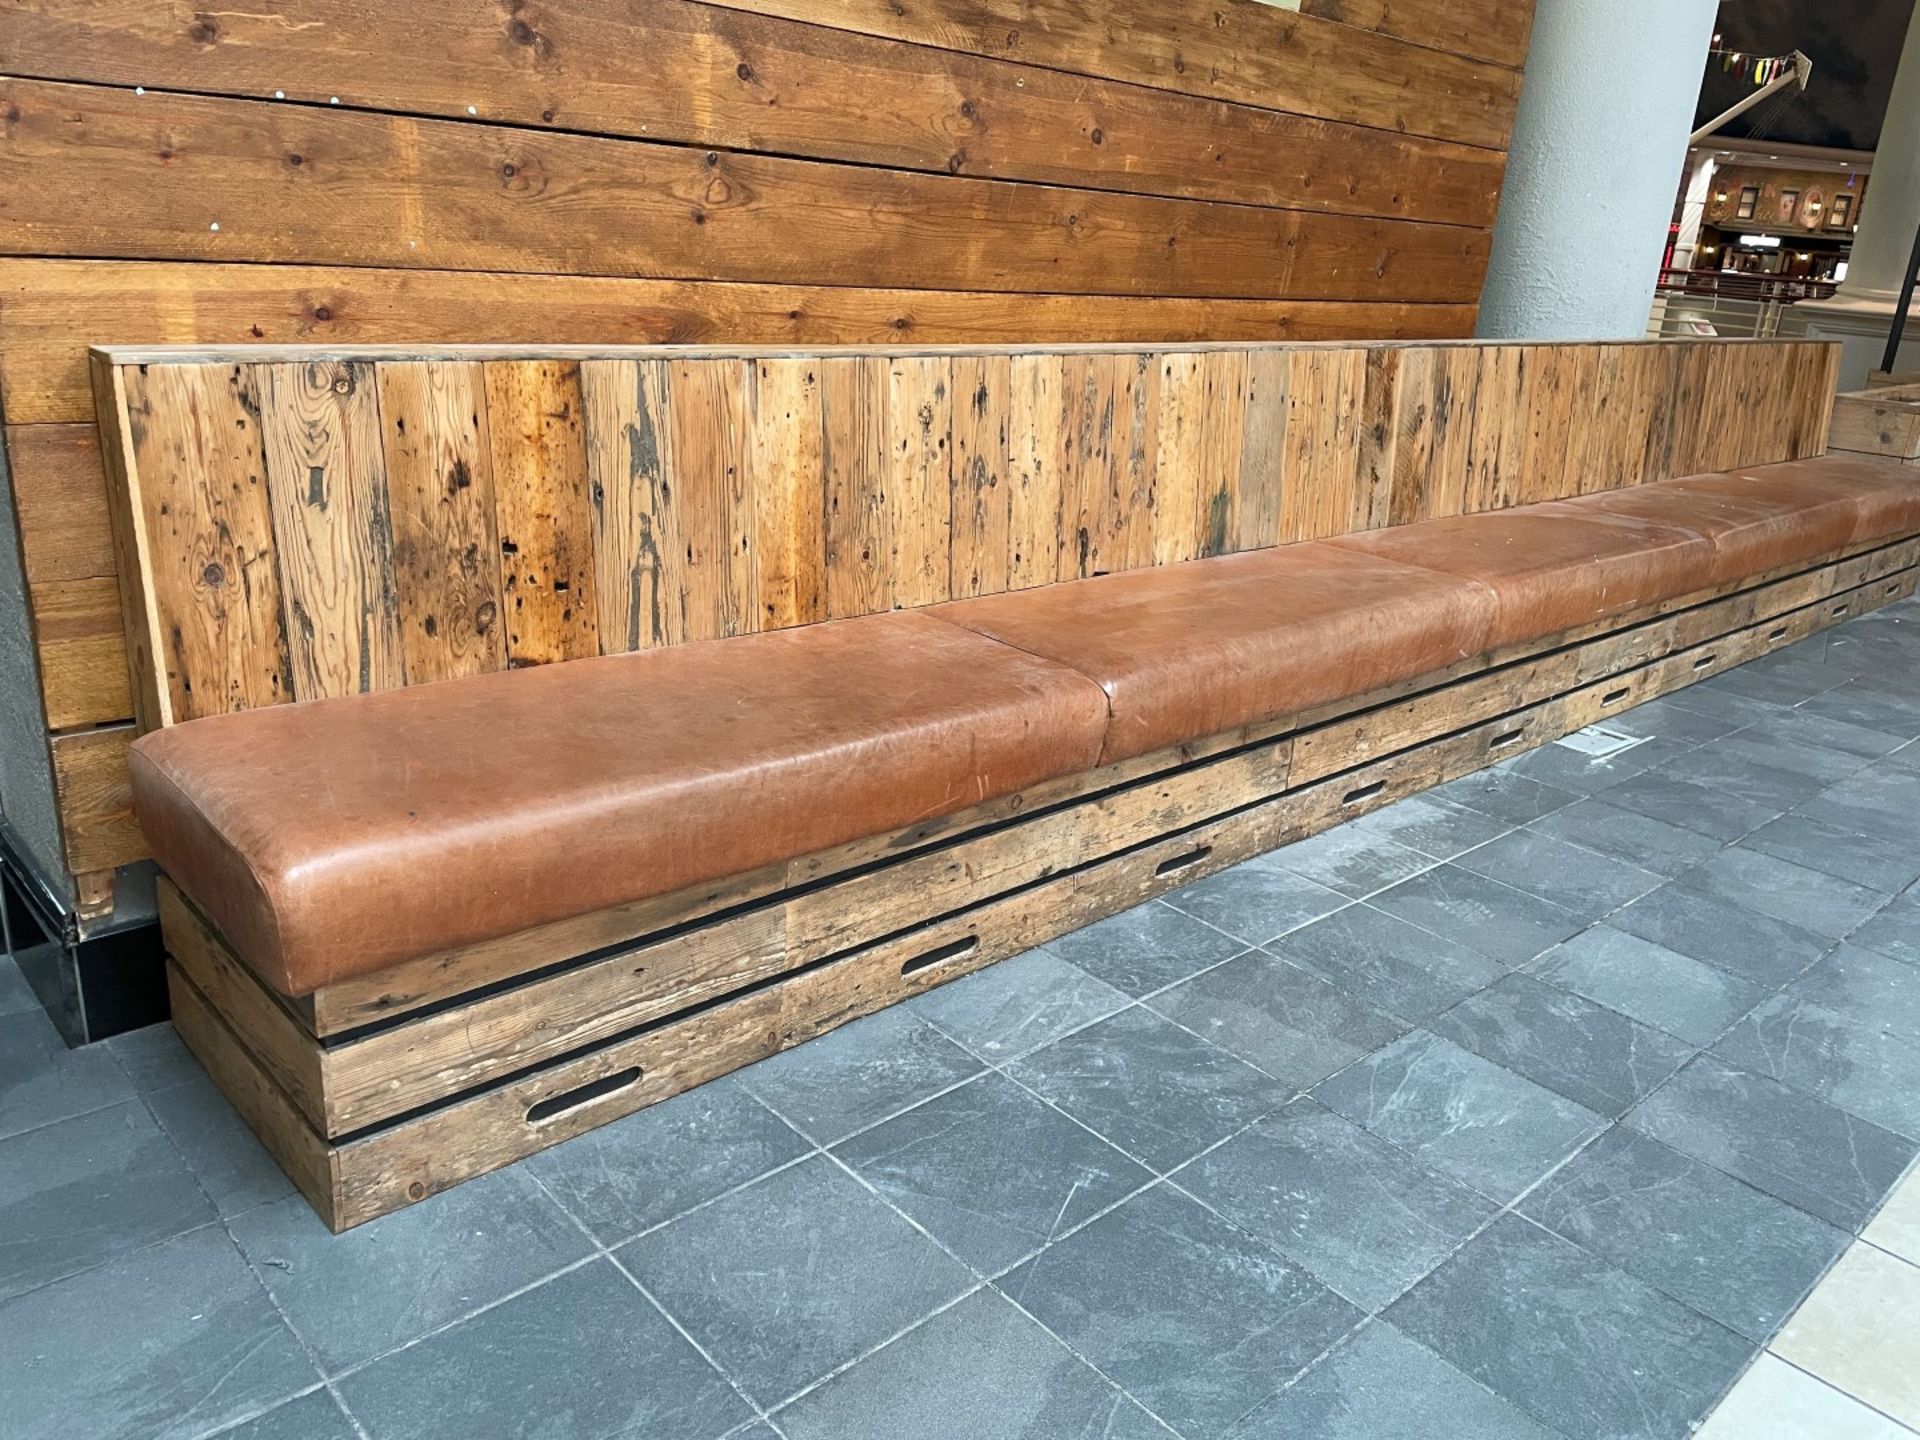 1 x Rustic Wooden Seating Bench Featuring Tan Leather Seat Pads - Suitable For Restaurants or Bars! - Image 6 of 12